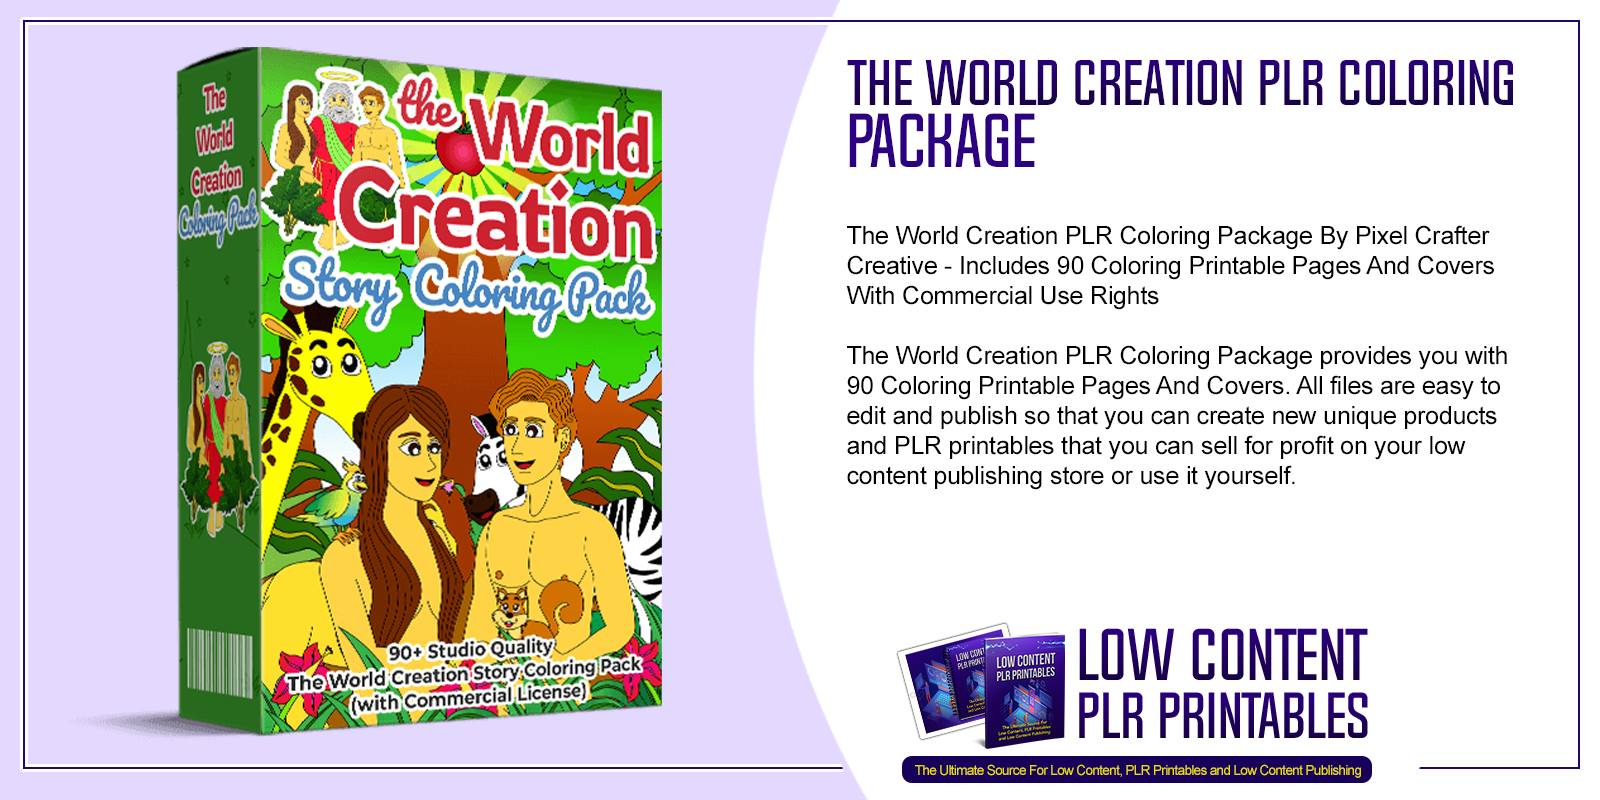 The World Creation PLR Coloring Package